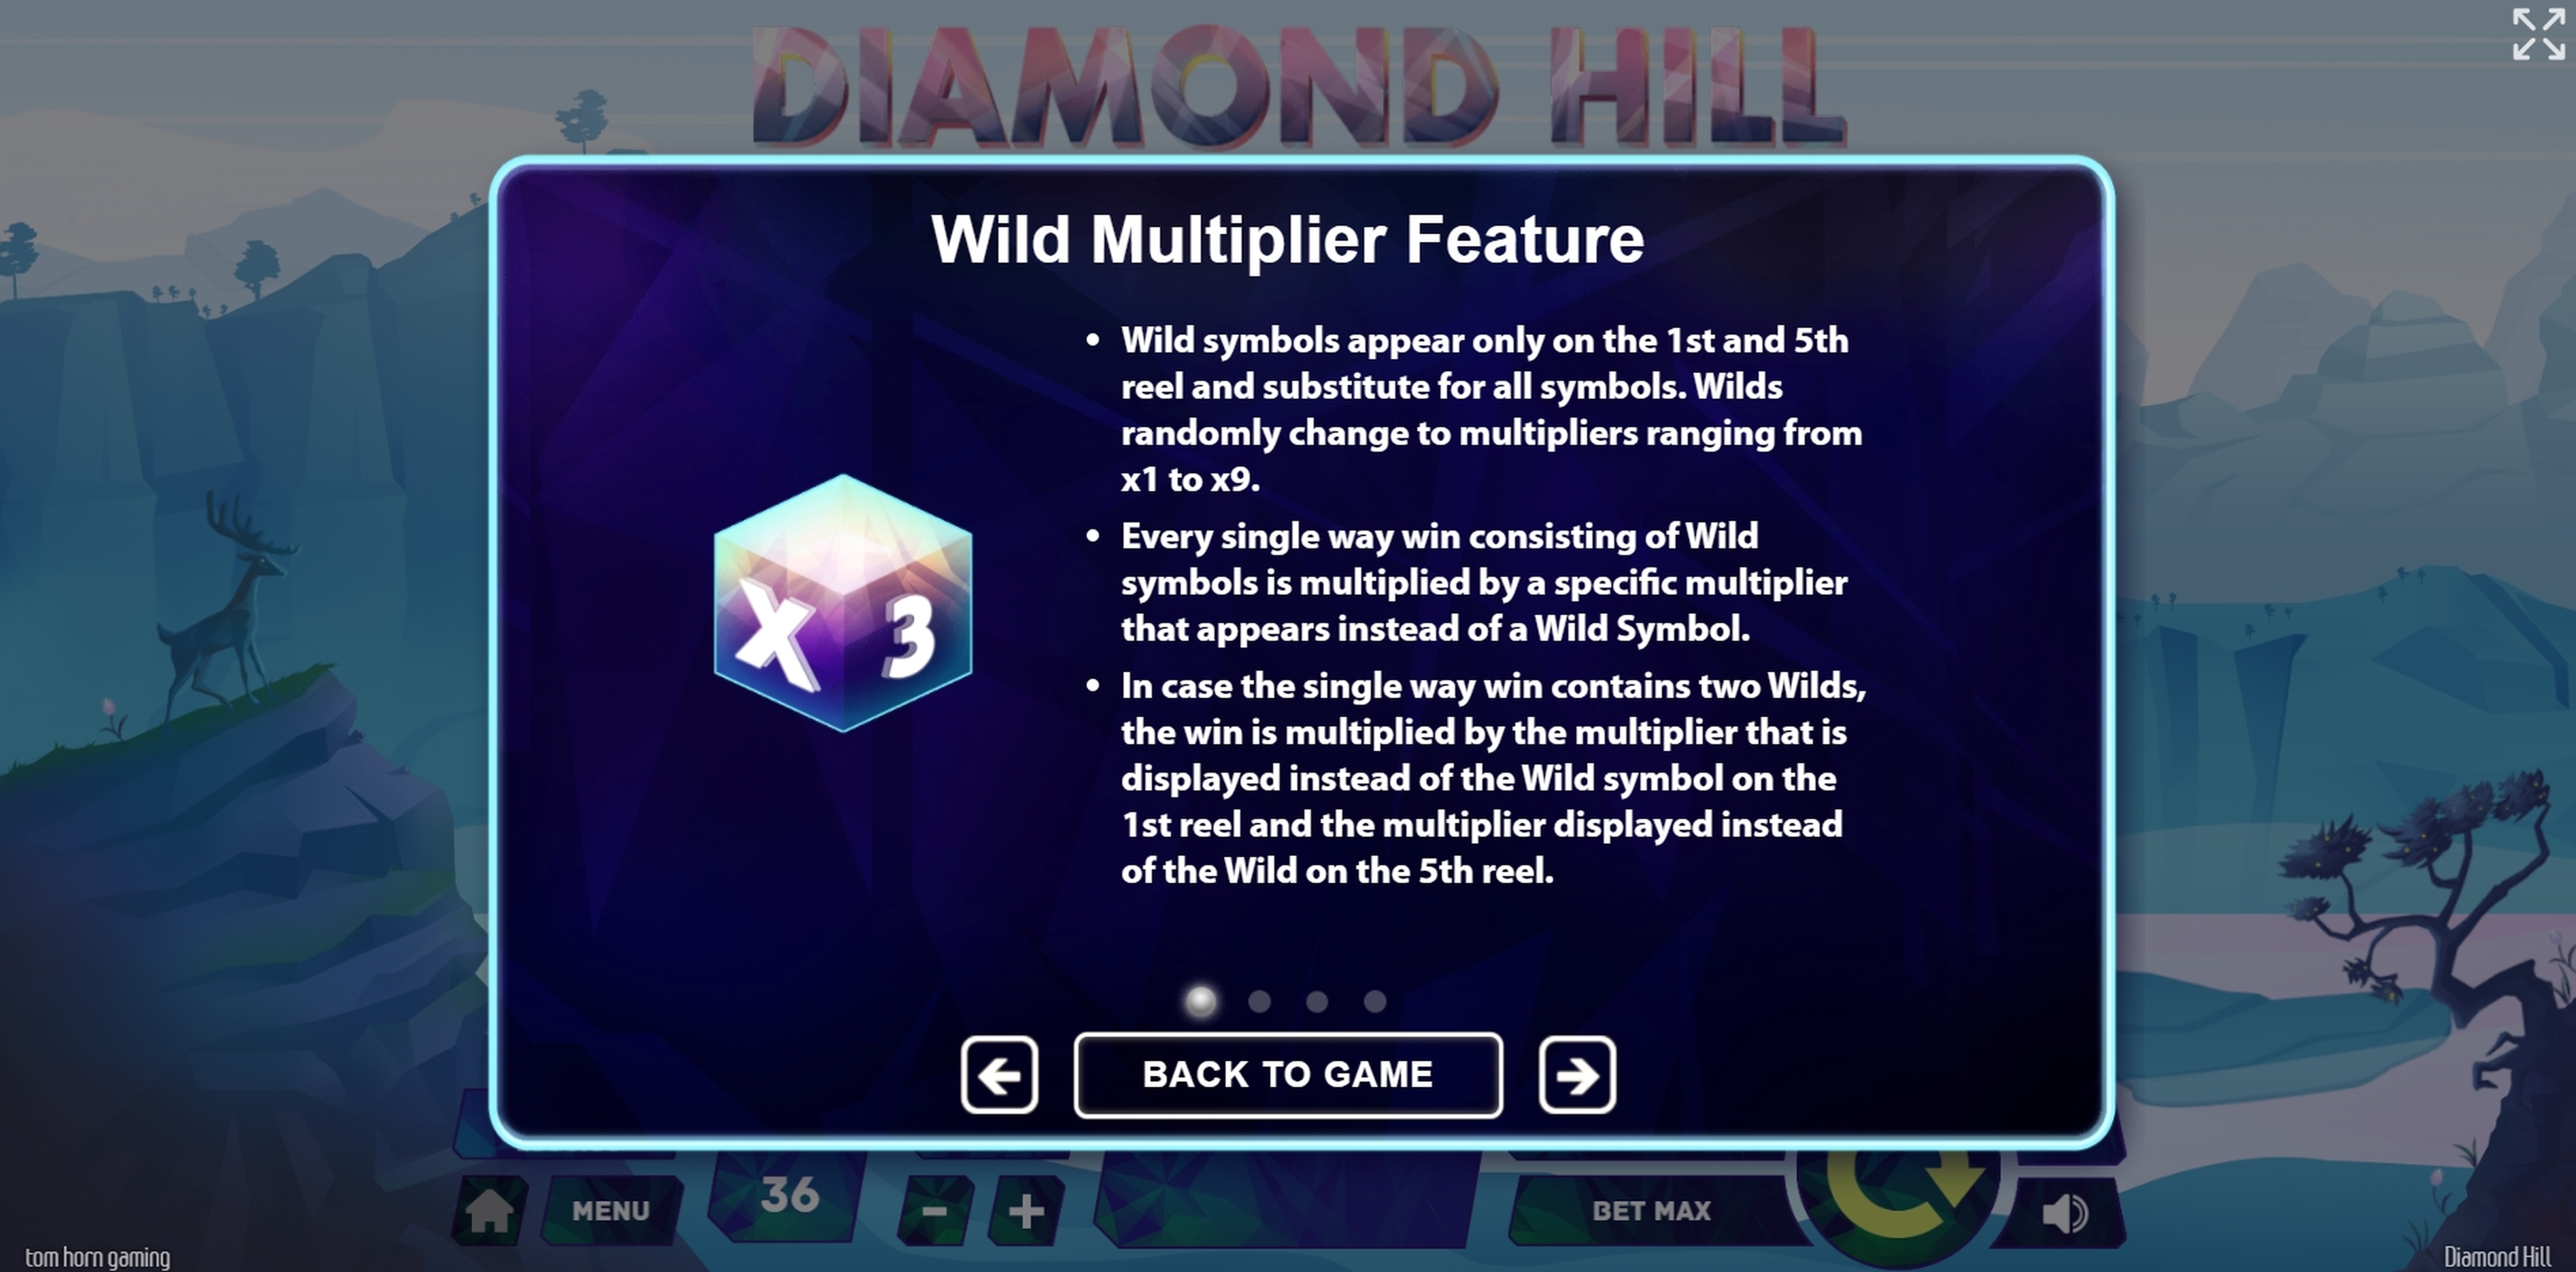 Info of Diamond Hill Slot Game by Tom Horn Gaming